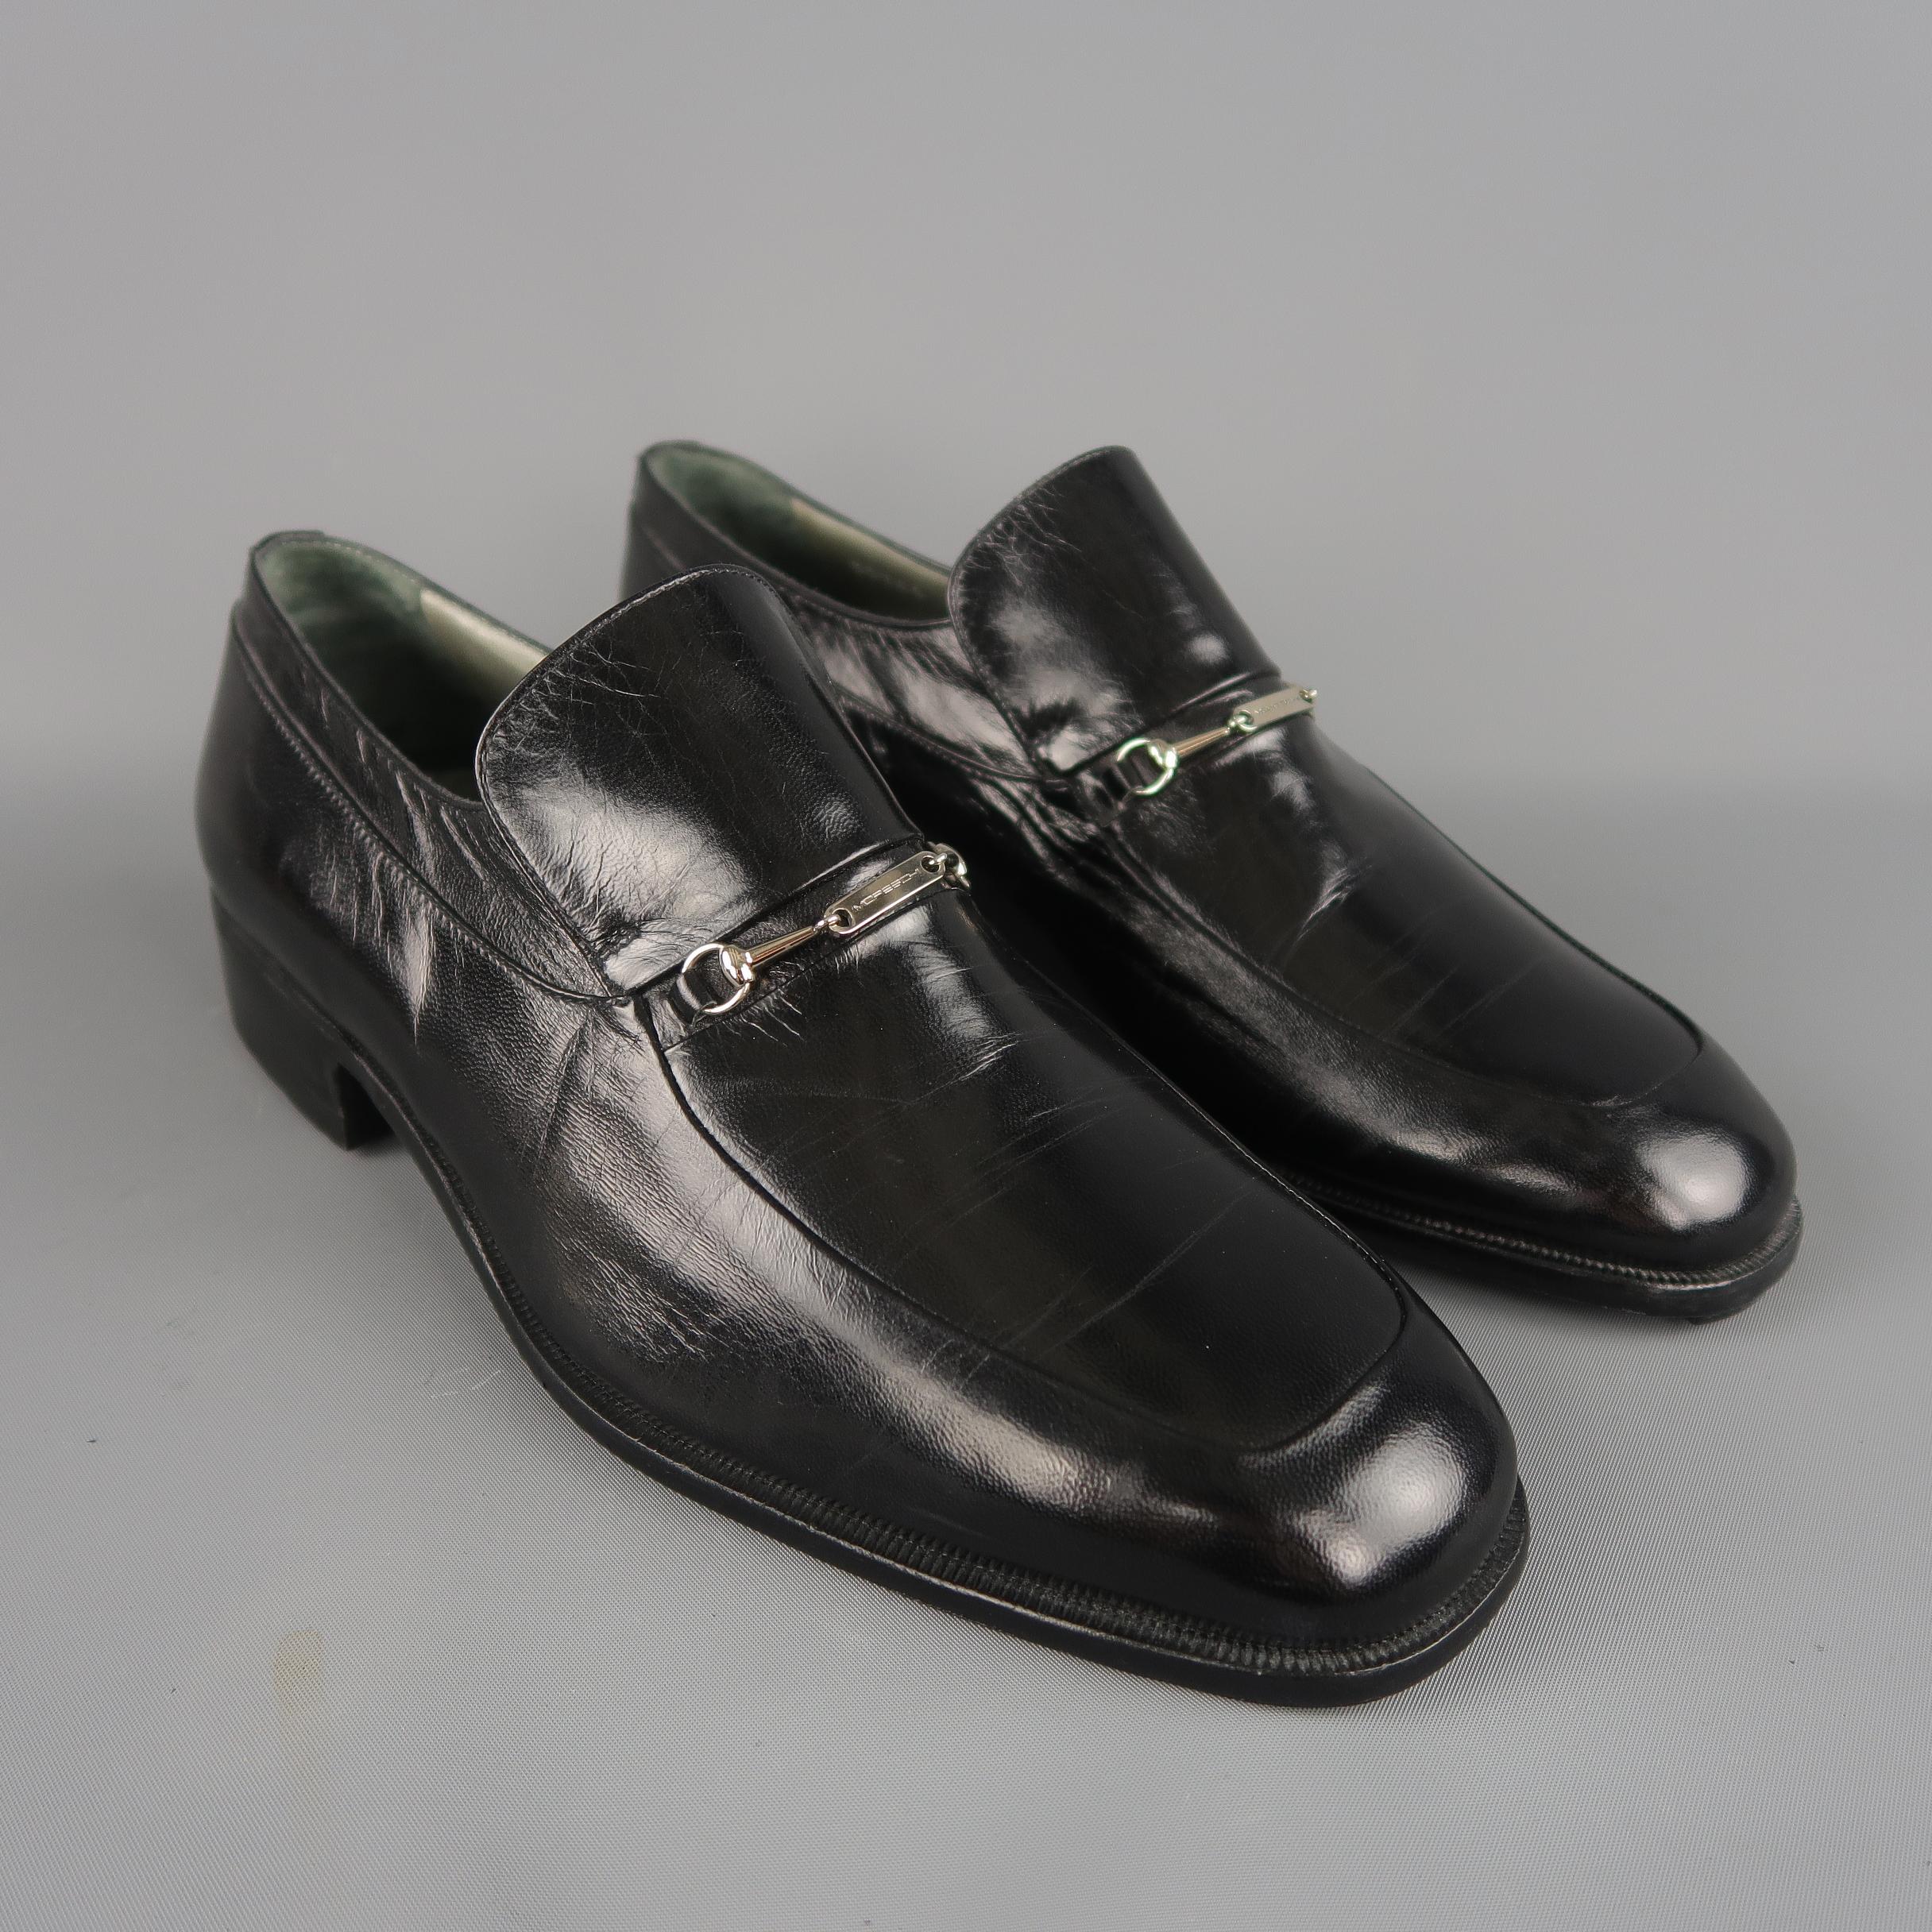 MORESCHI loafers come in high shine polished leather with a tapered square apron toe and silver tone hardware detail. Made in Italy.
 
New without Tags.
Marked: 7